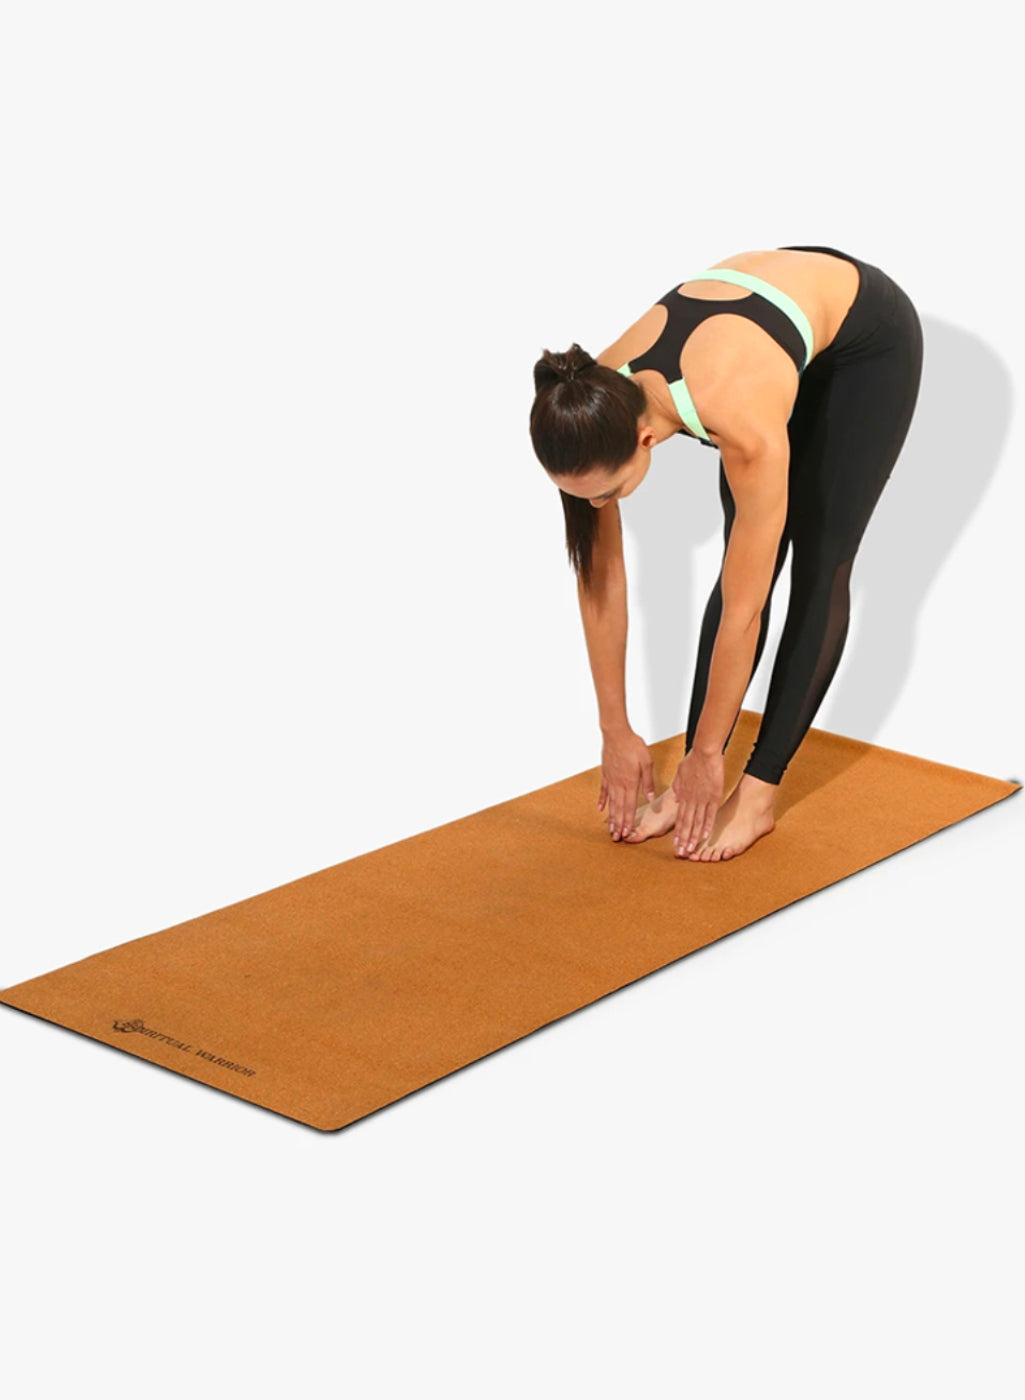 Warrior Mat – THE LUXEWELL